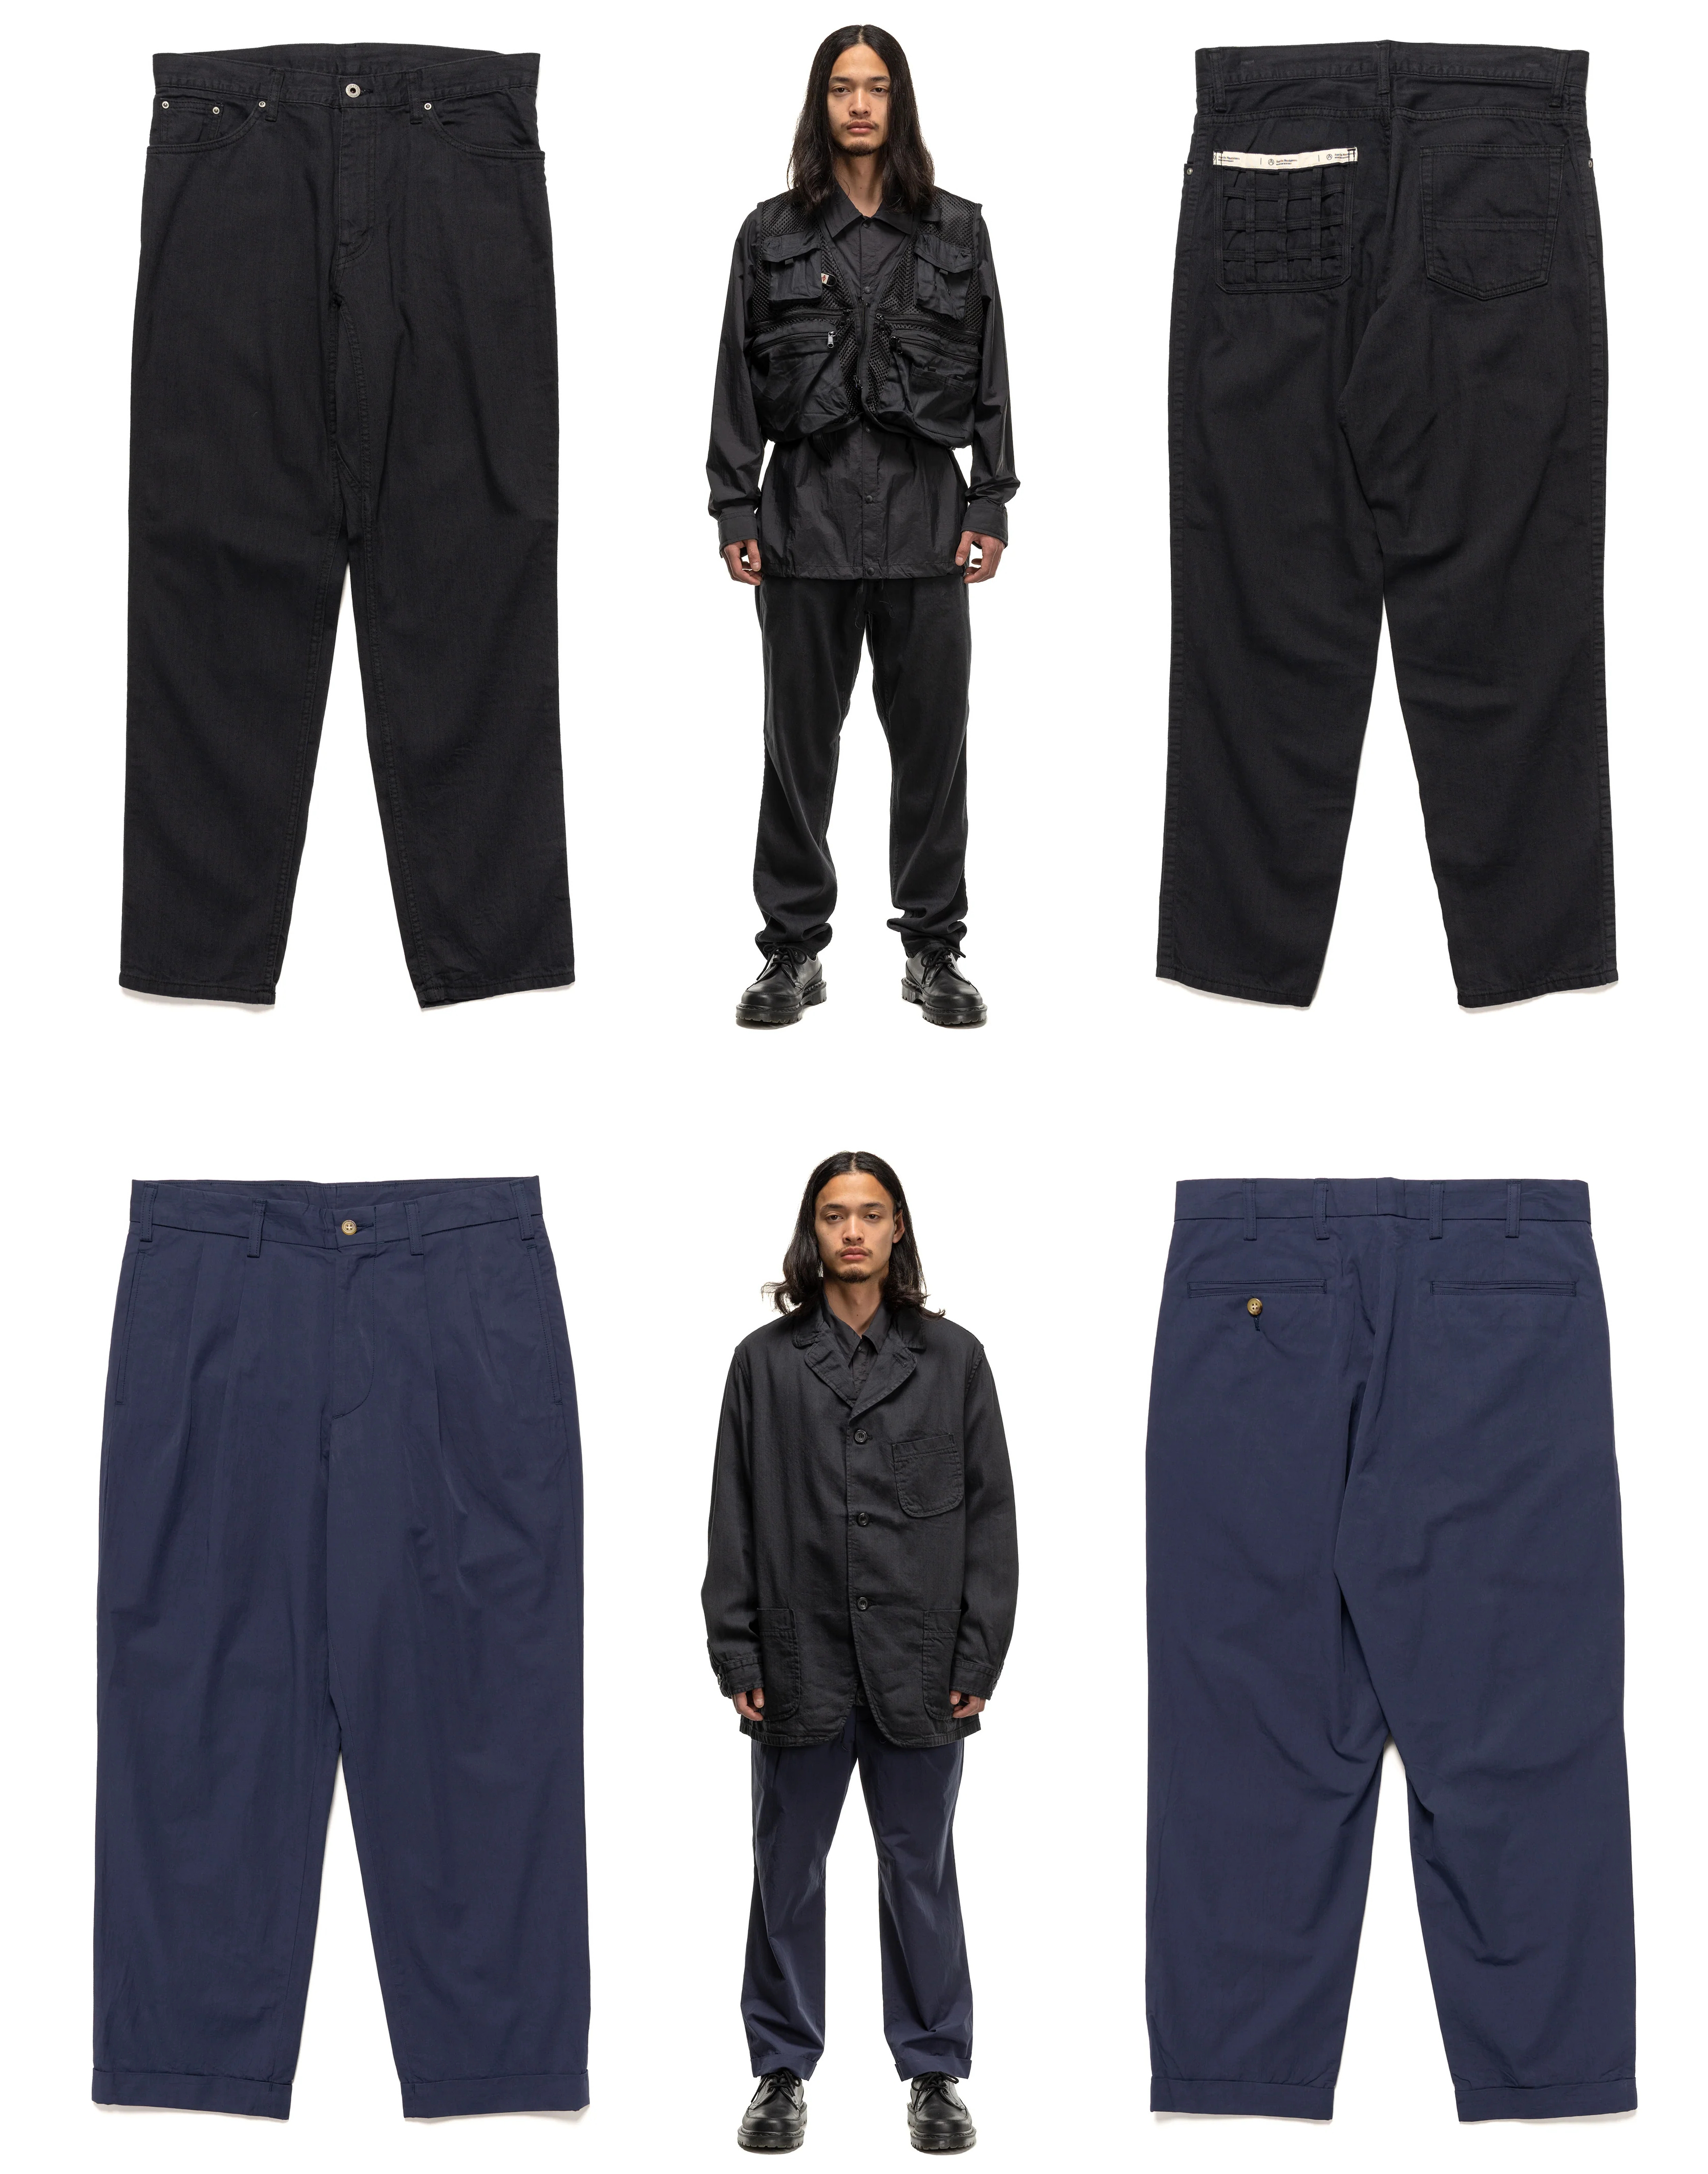 What are cargo or chino pants? - Quora